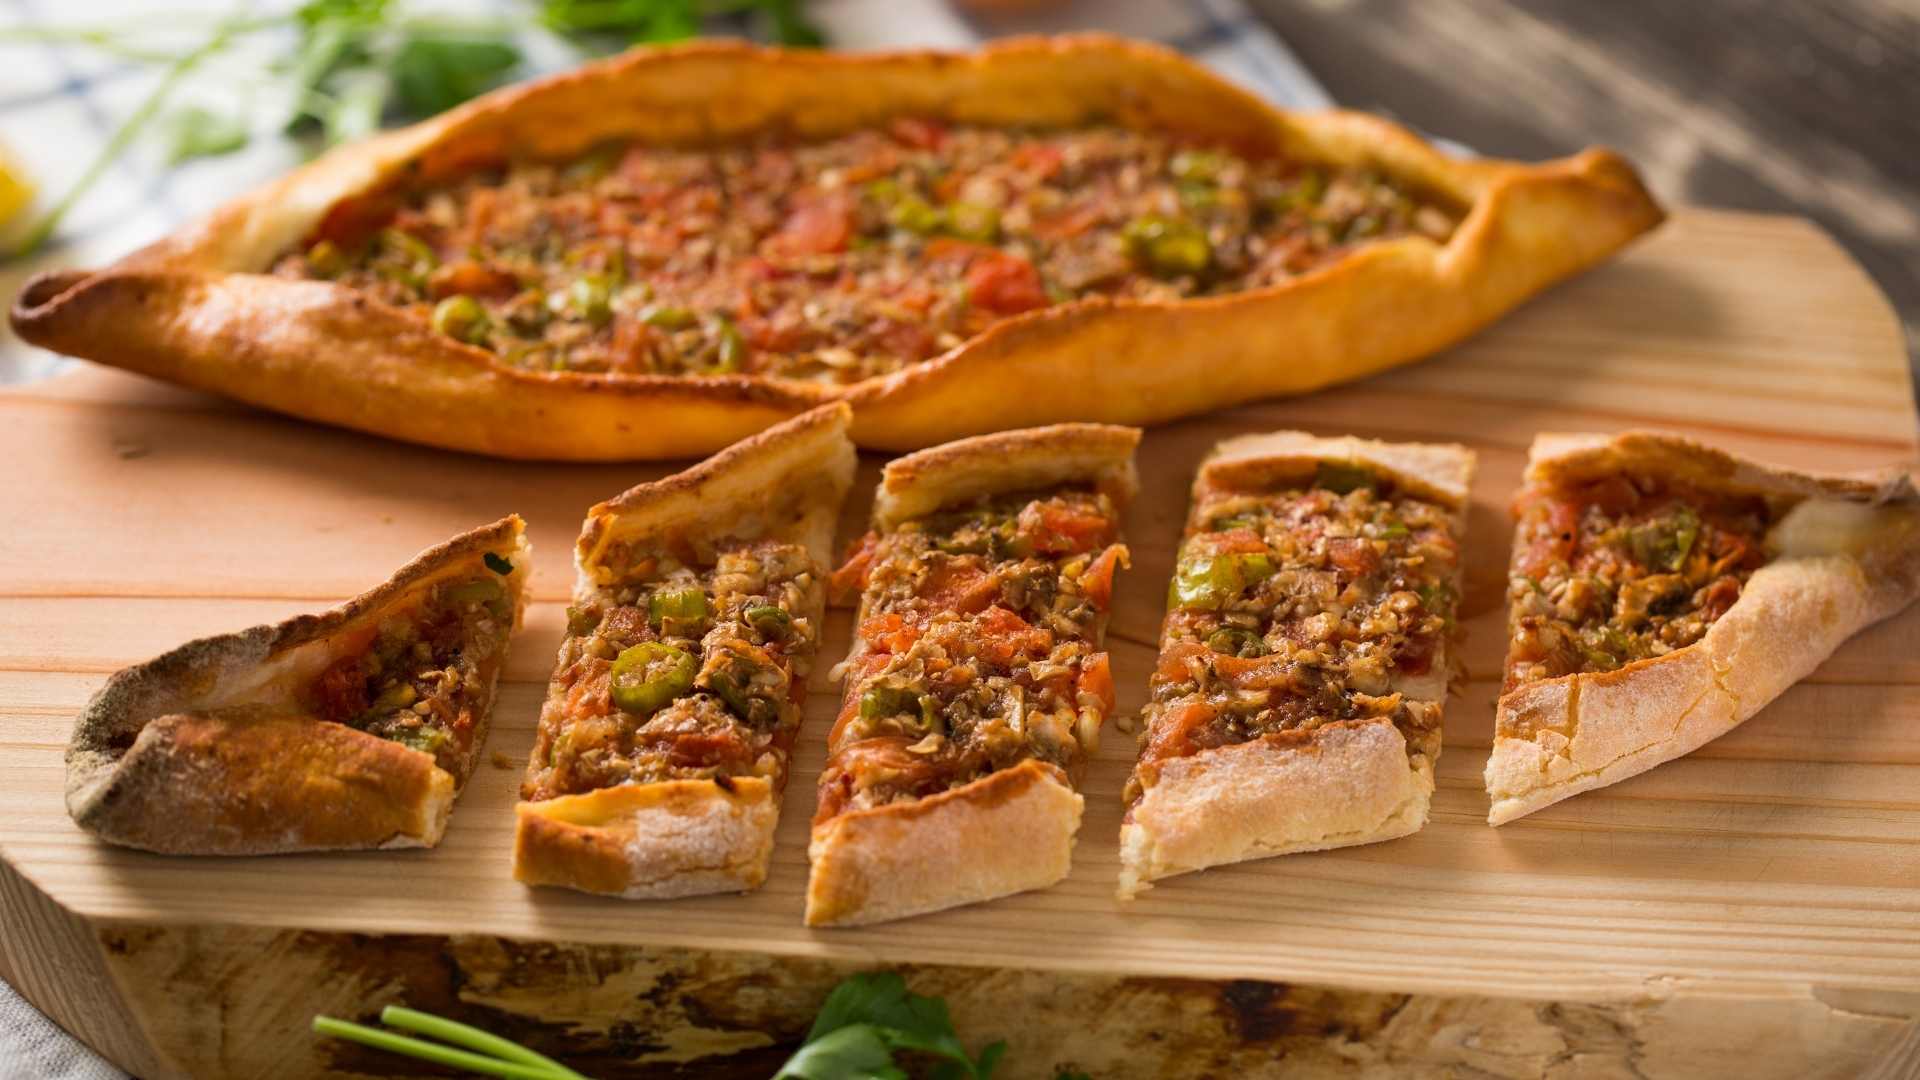 Get Your Hands on This Deliciously Satisfying Ground Beef Pide Recipe The Ultimate Comfort Food 4